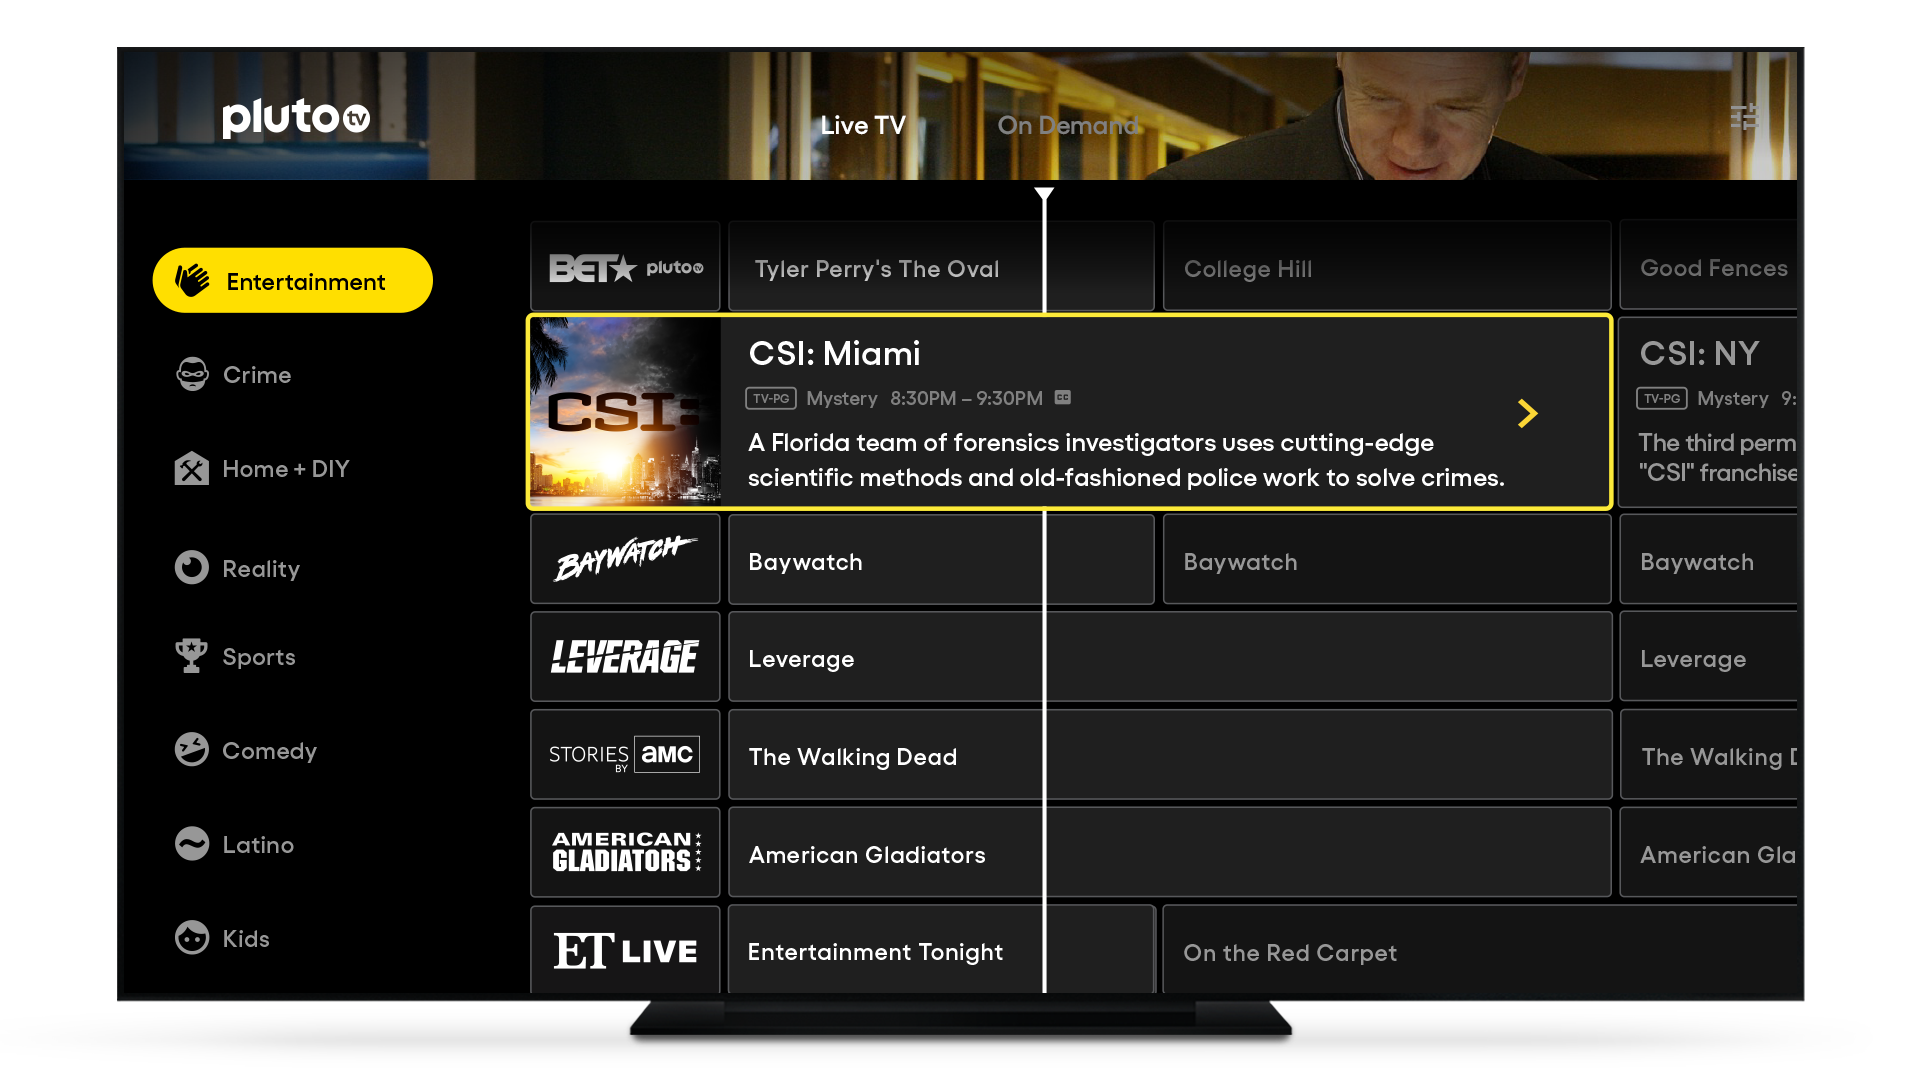 An example of Pluto TV's listings.